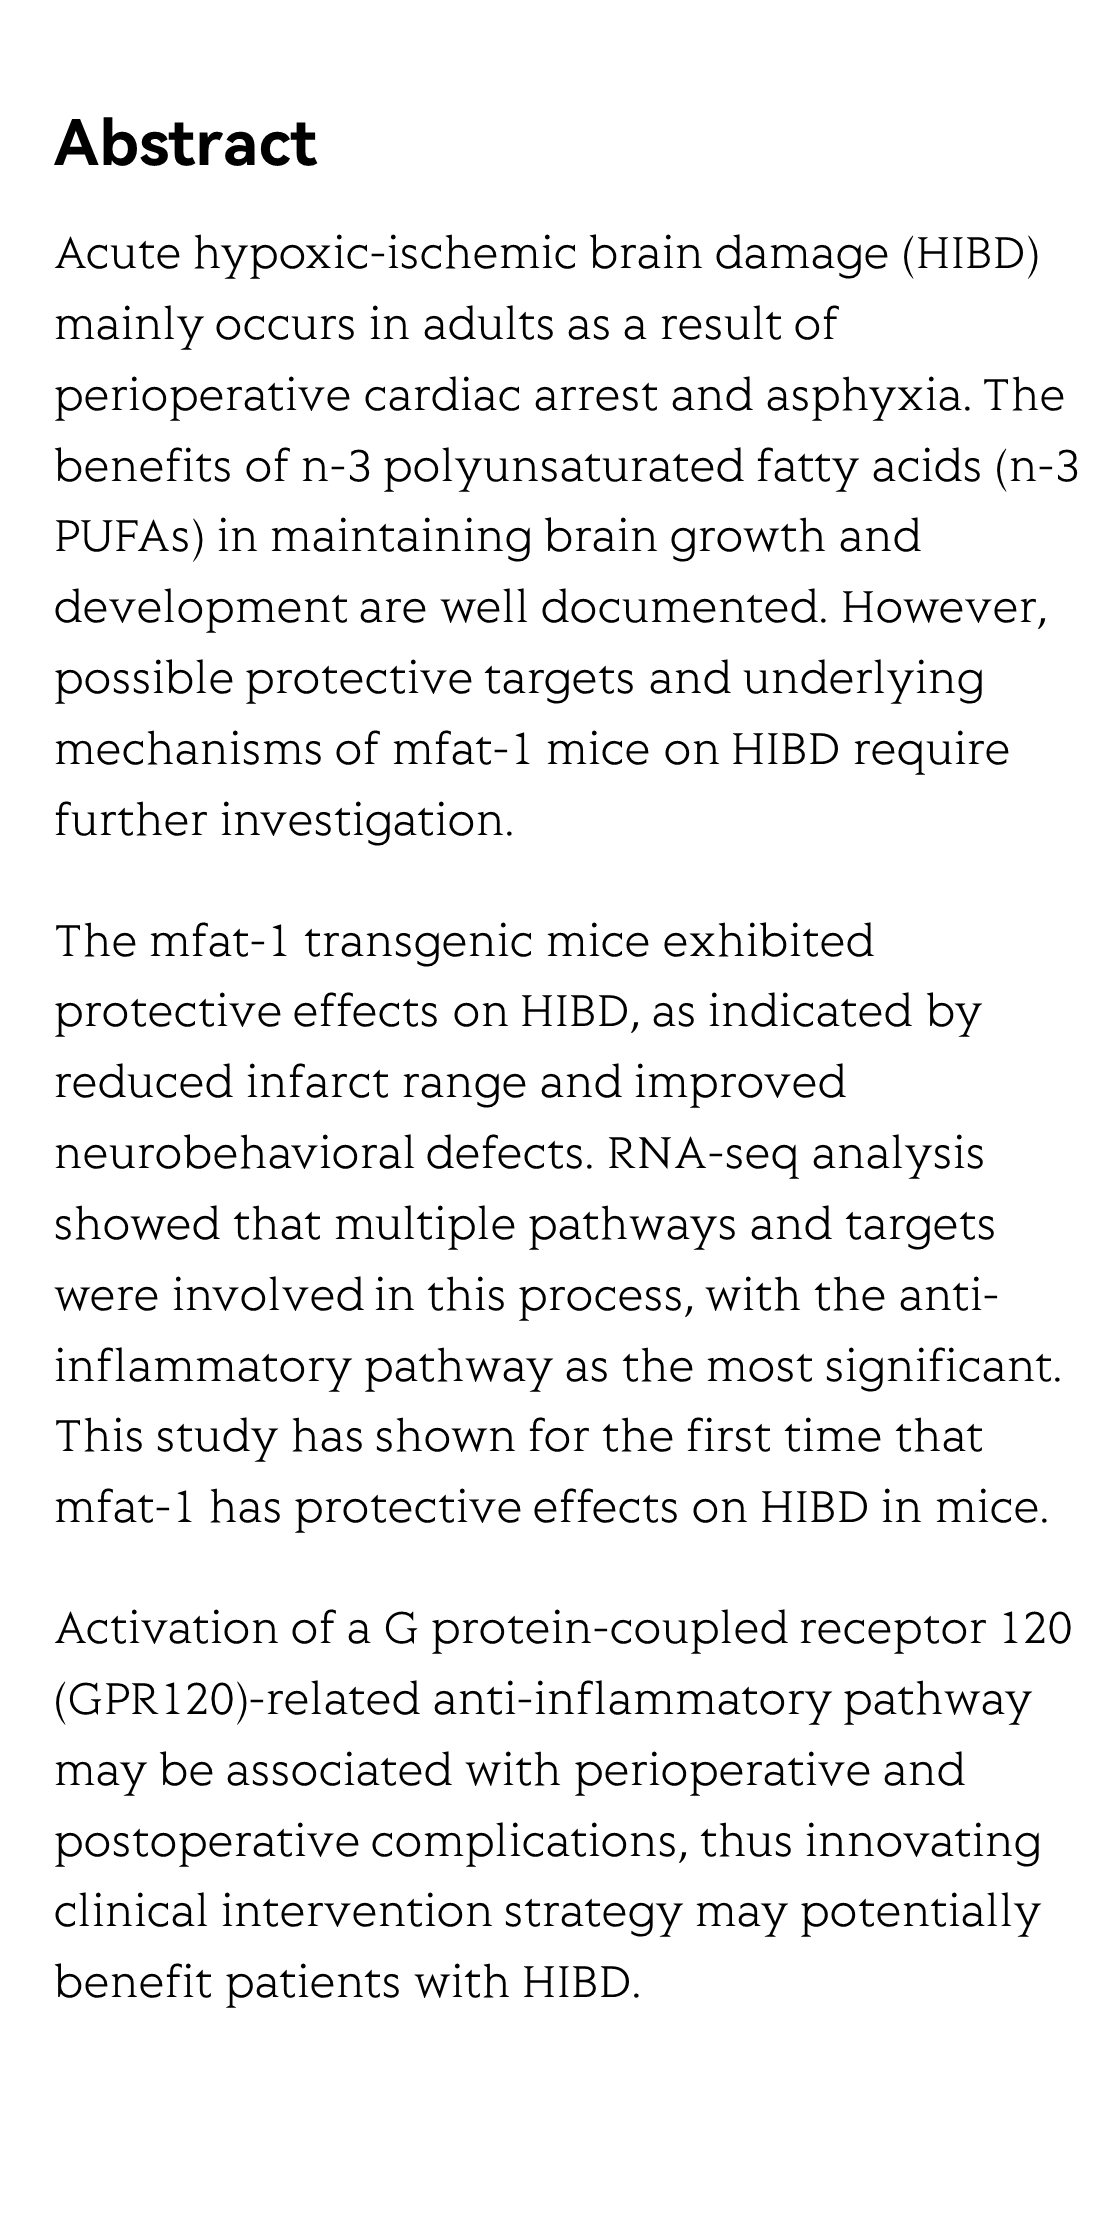 Protective effects on acute hypoxic-ischemic brain damage in mfat-1 transgenic mice by alleviating neuroinflammation_2